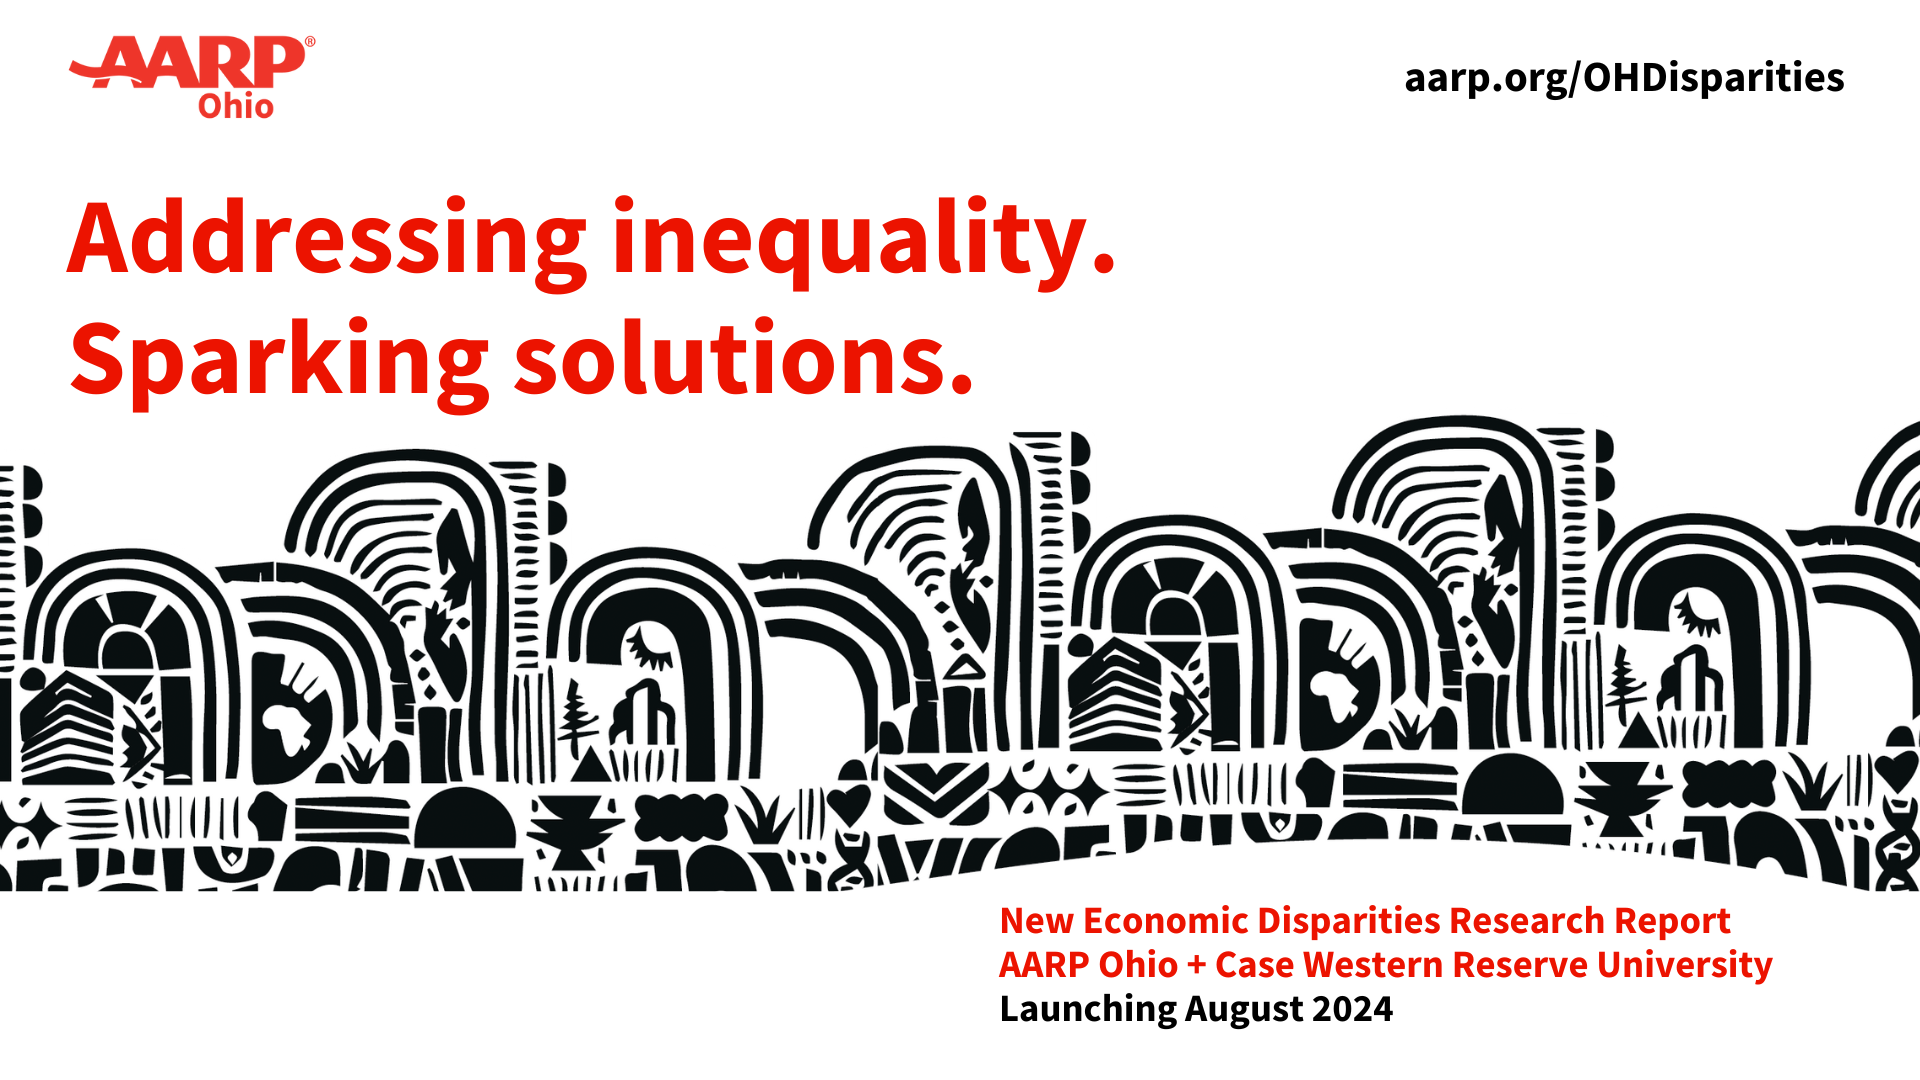 Announcement of launch of a new economic disparities research report by AARP Ohio and Case Western Reserve University in August 2024.